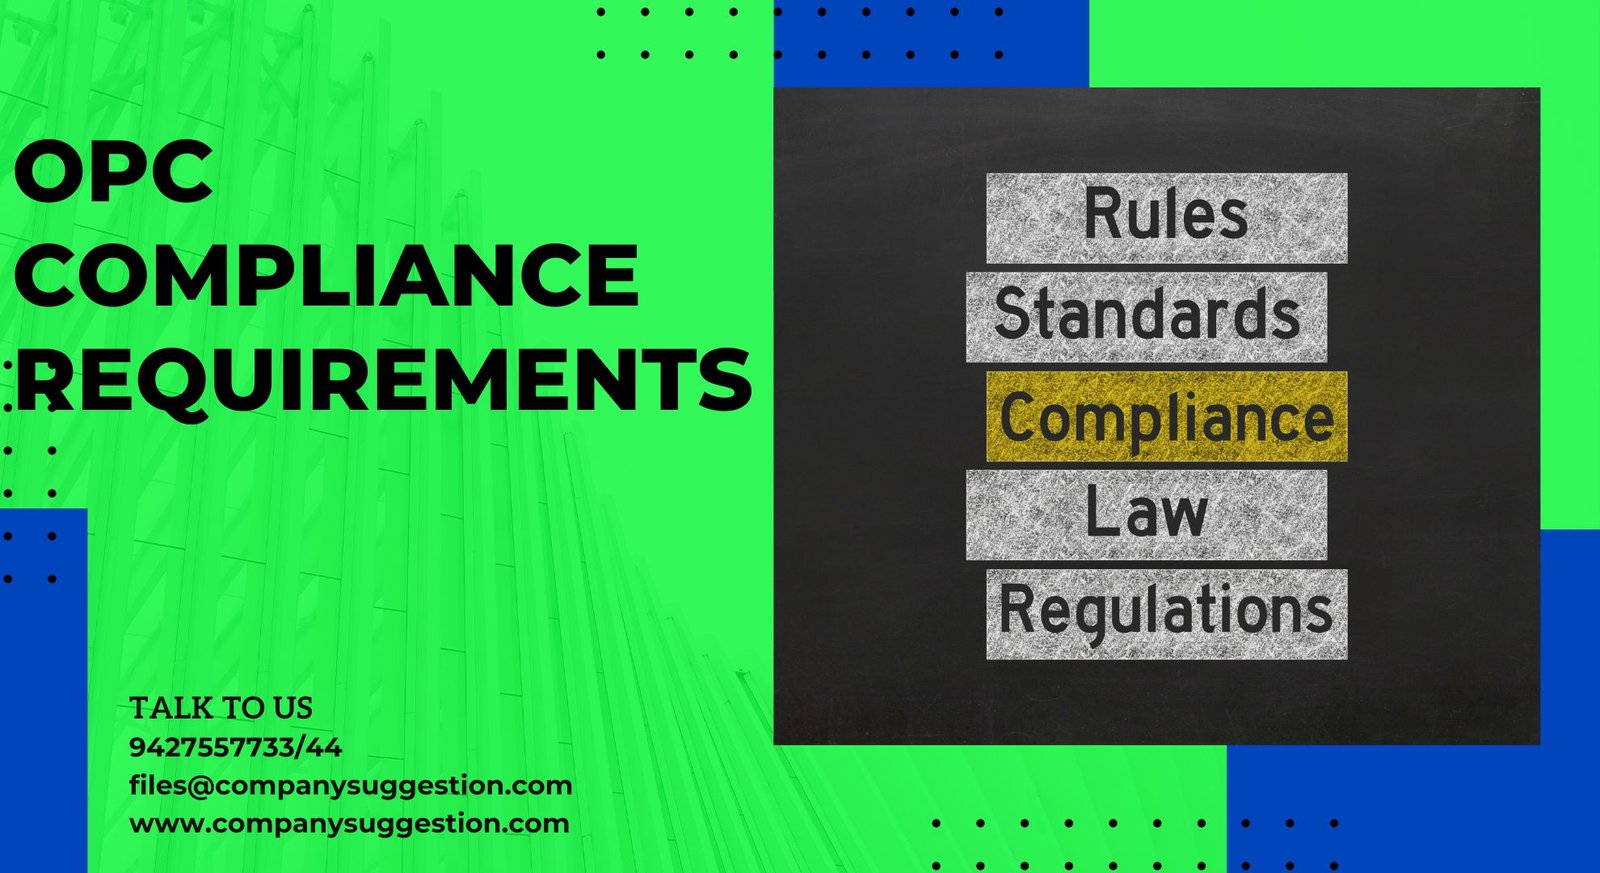 OPC COMPLIANCE REQUIREMENTS